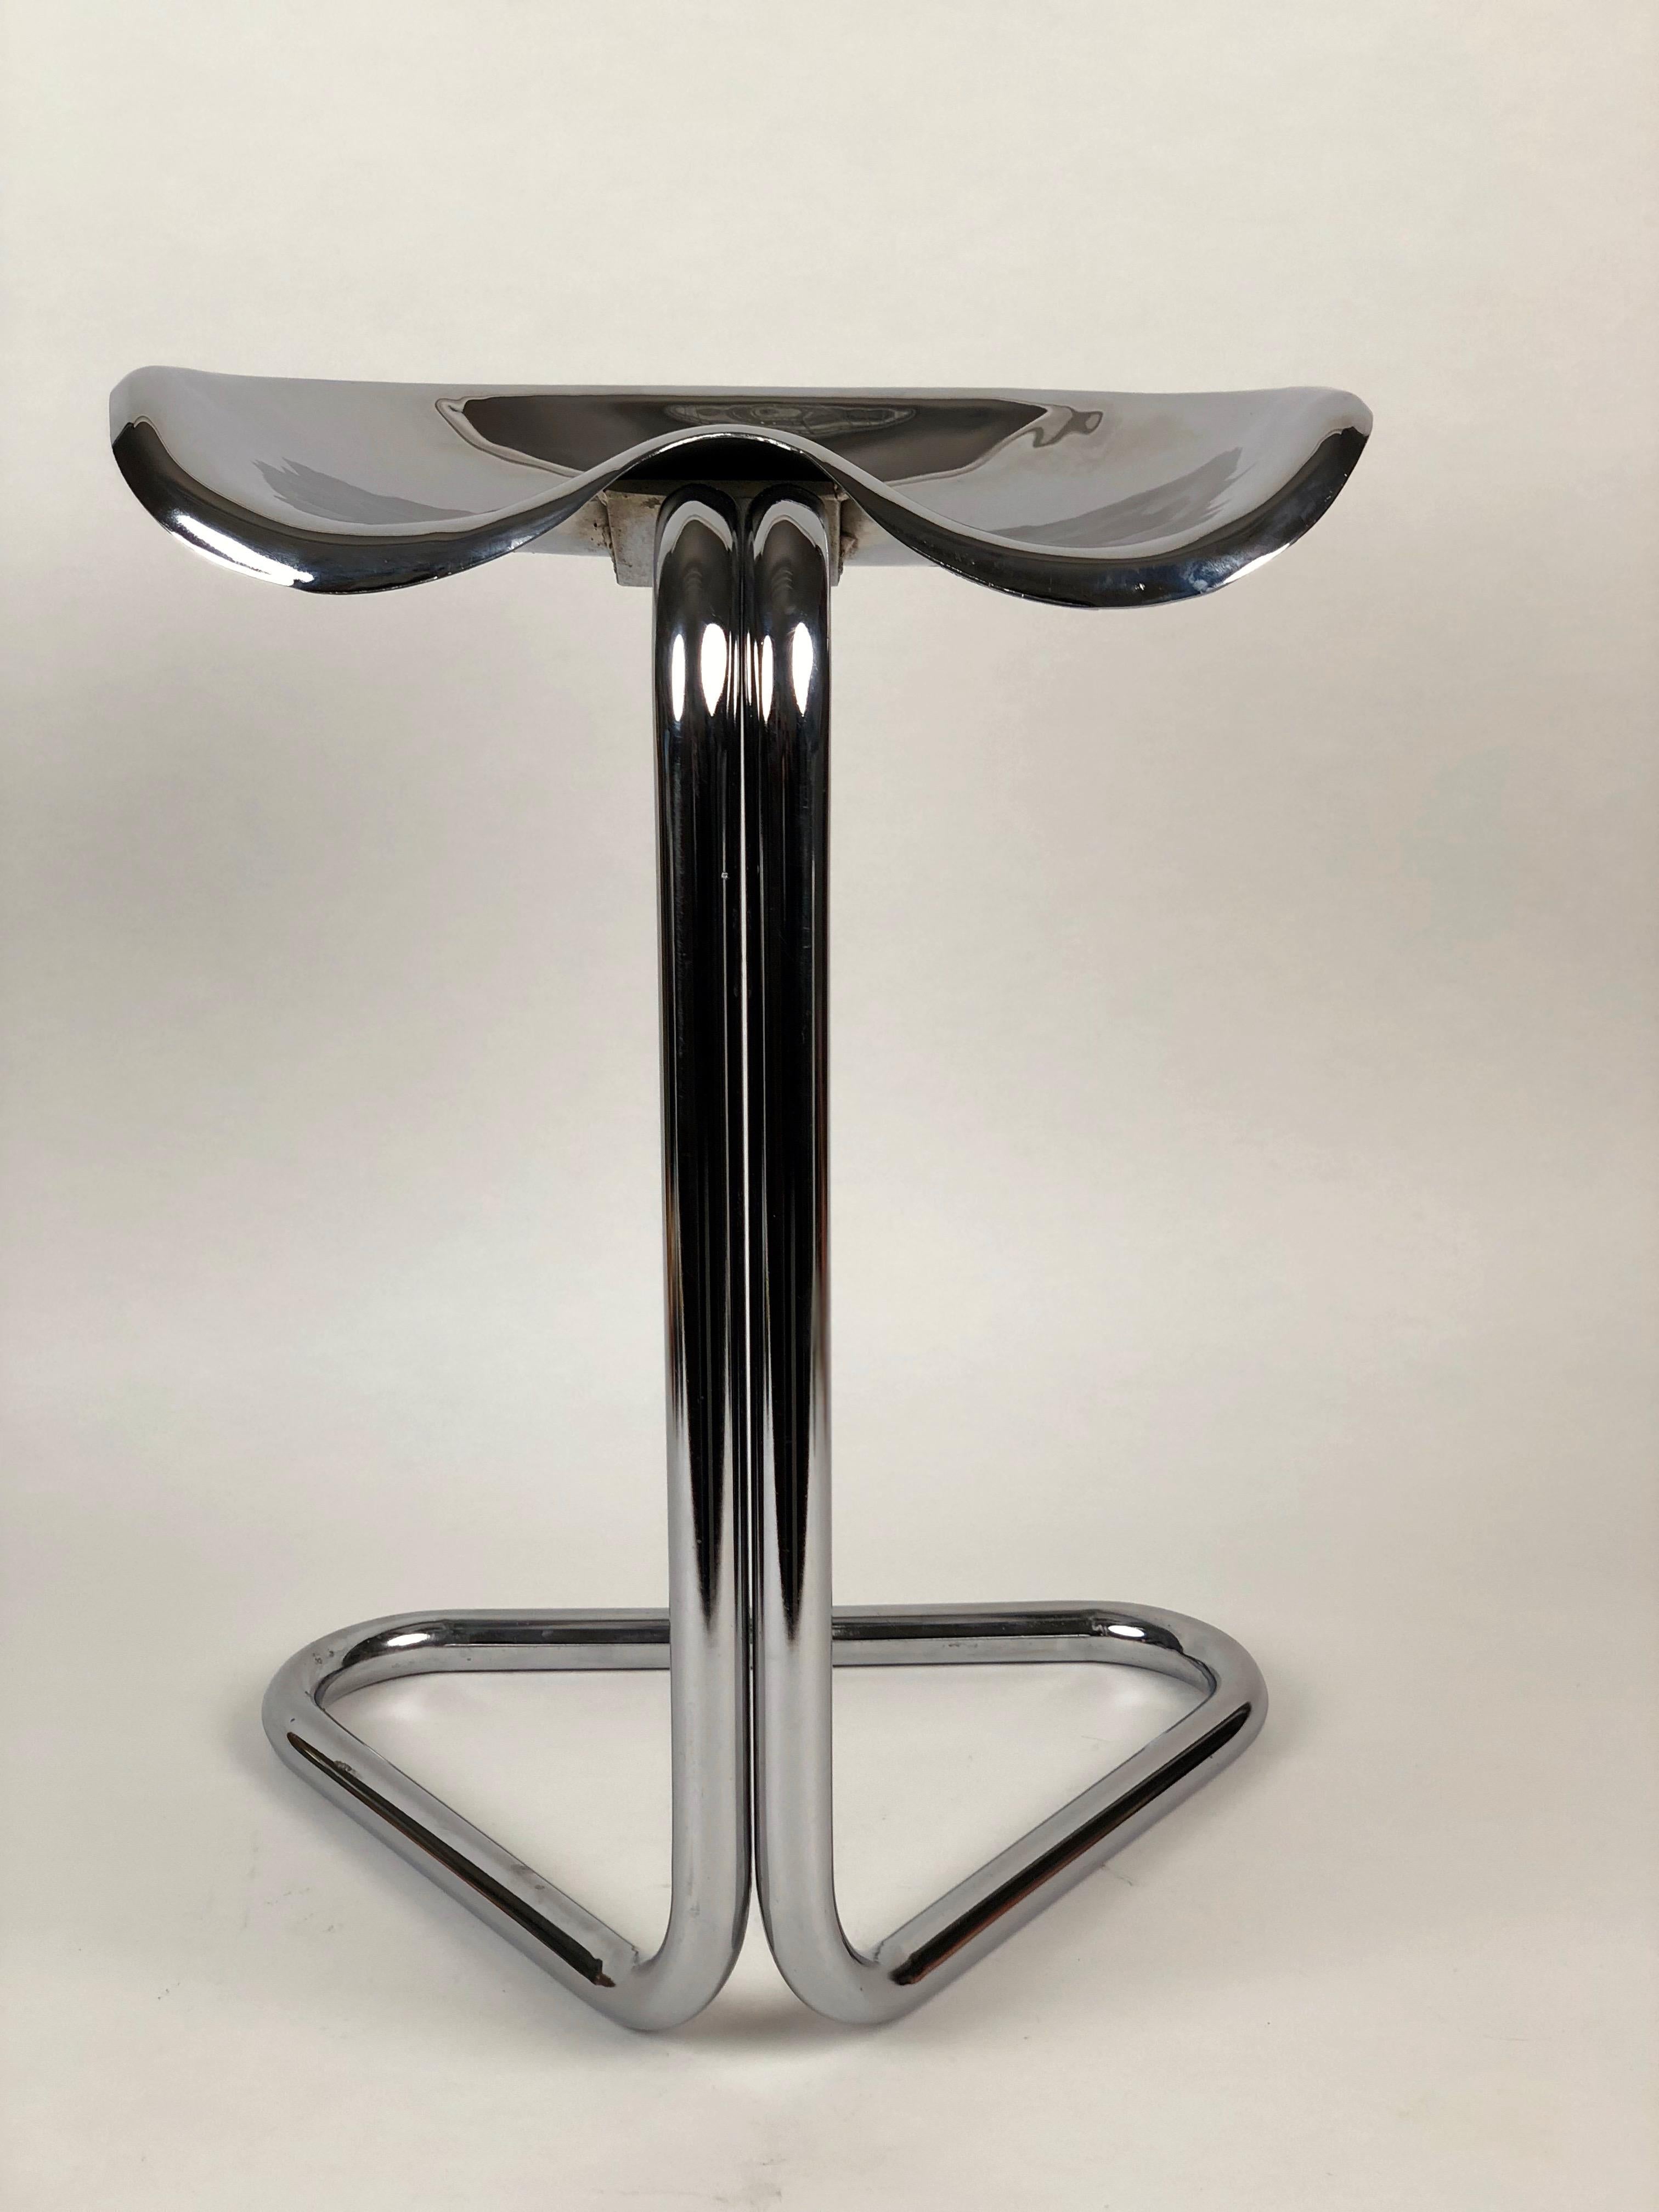 A stylish iconic tractor stool designed by Rodney Kinsman for OMK. It was made in England and dates from the 1960s.
The chrome steel is clean of rust. I find it surprisingly comfortable as well as beautiful to look at.